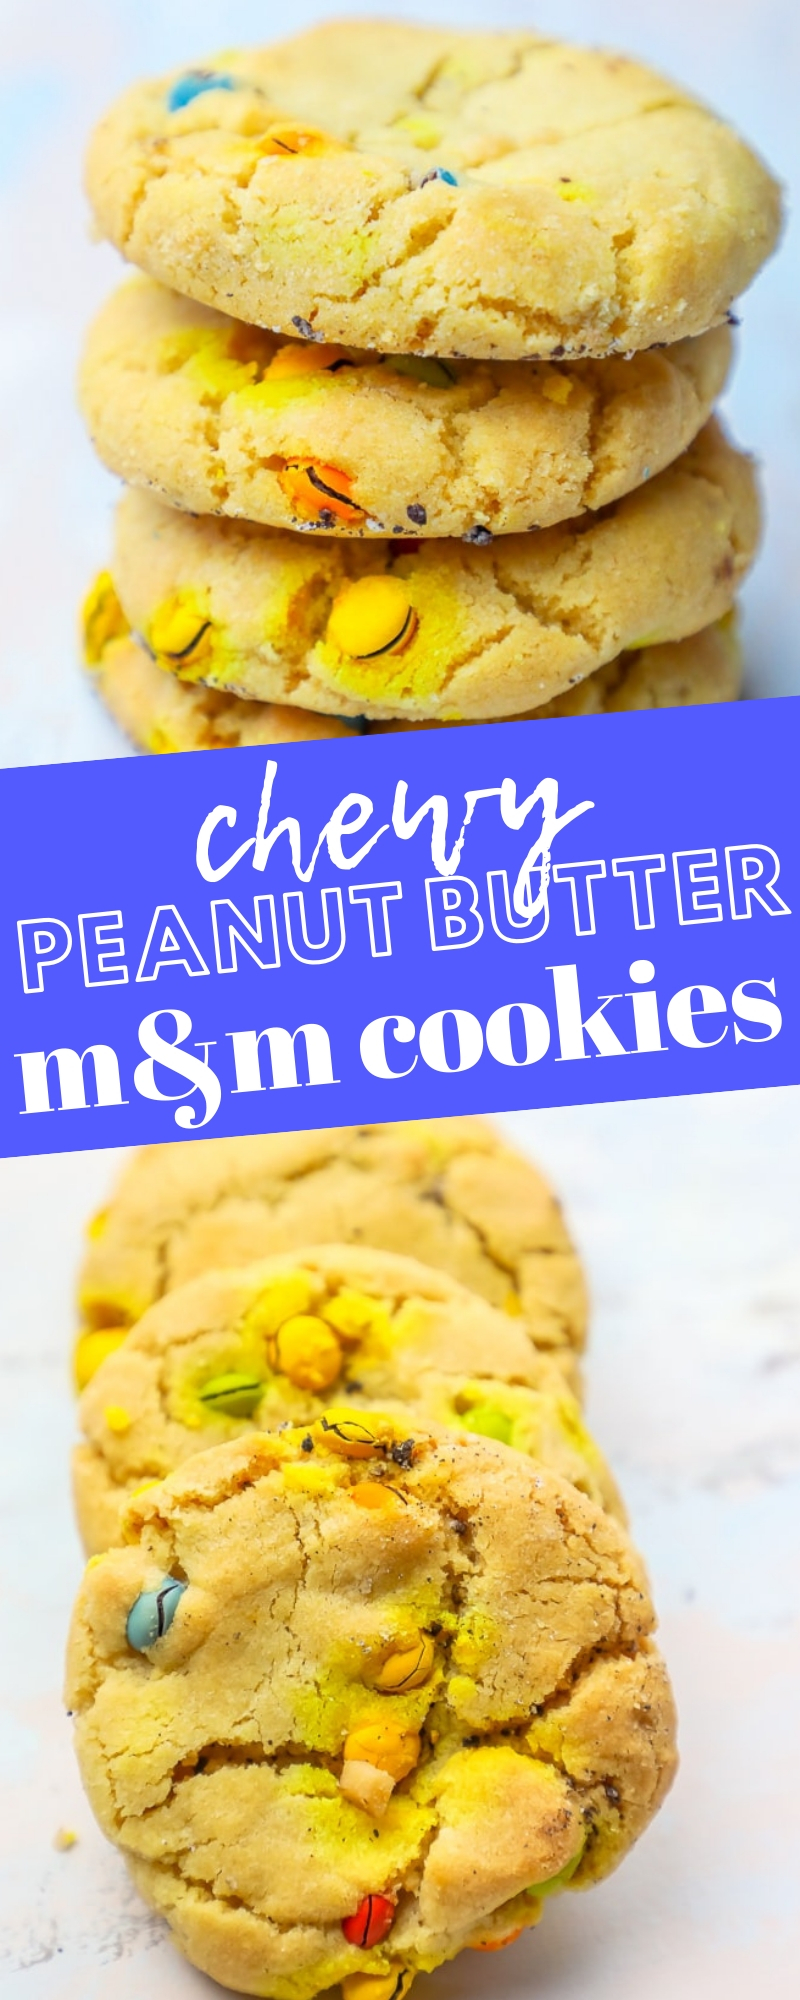 4 m&m peanut butter cookies stacked, chewy peanut butter m&m cookies written across it